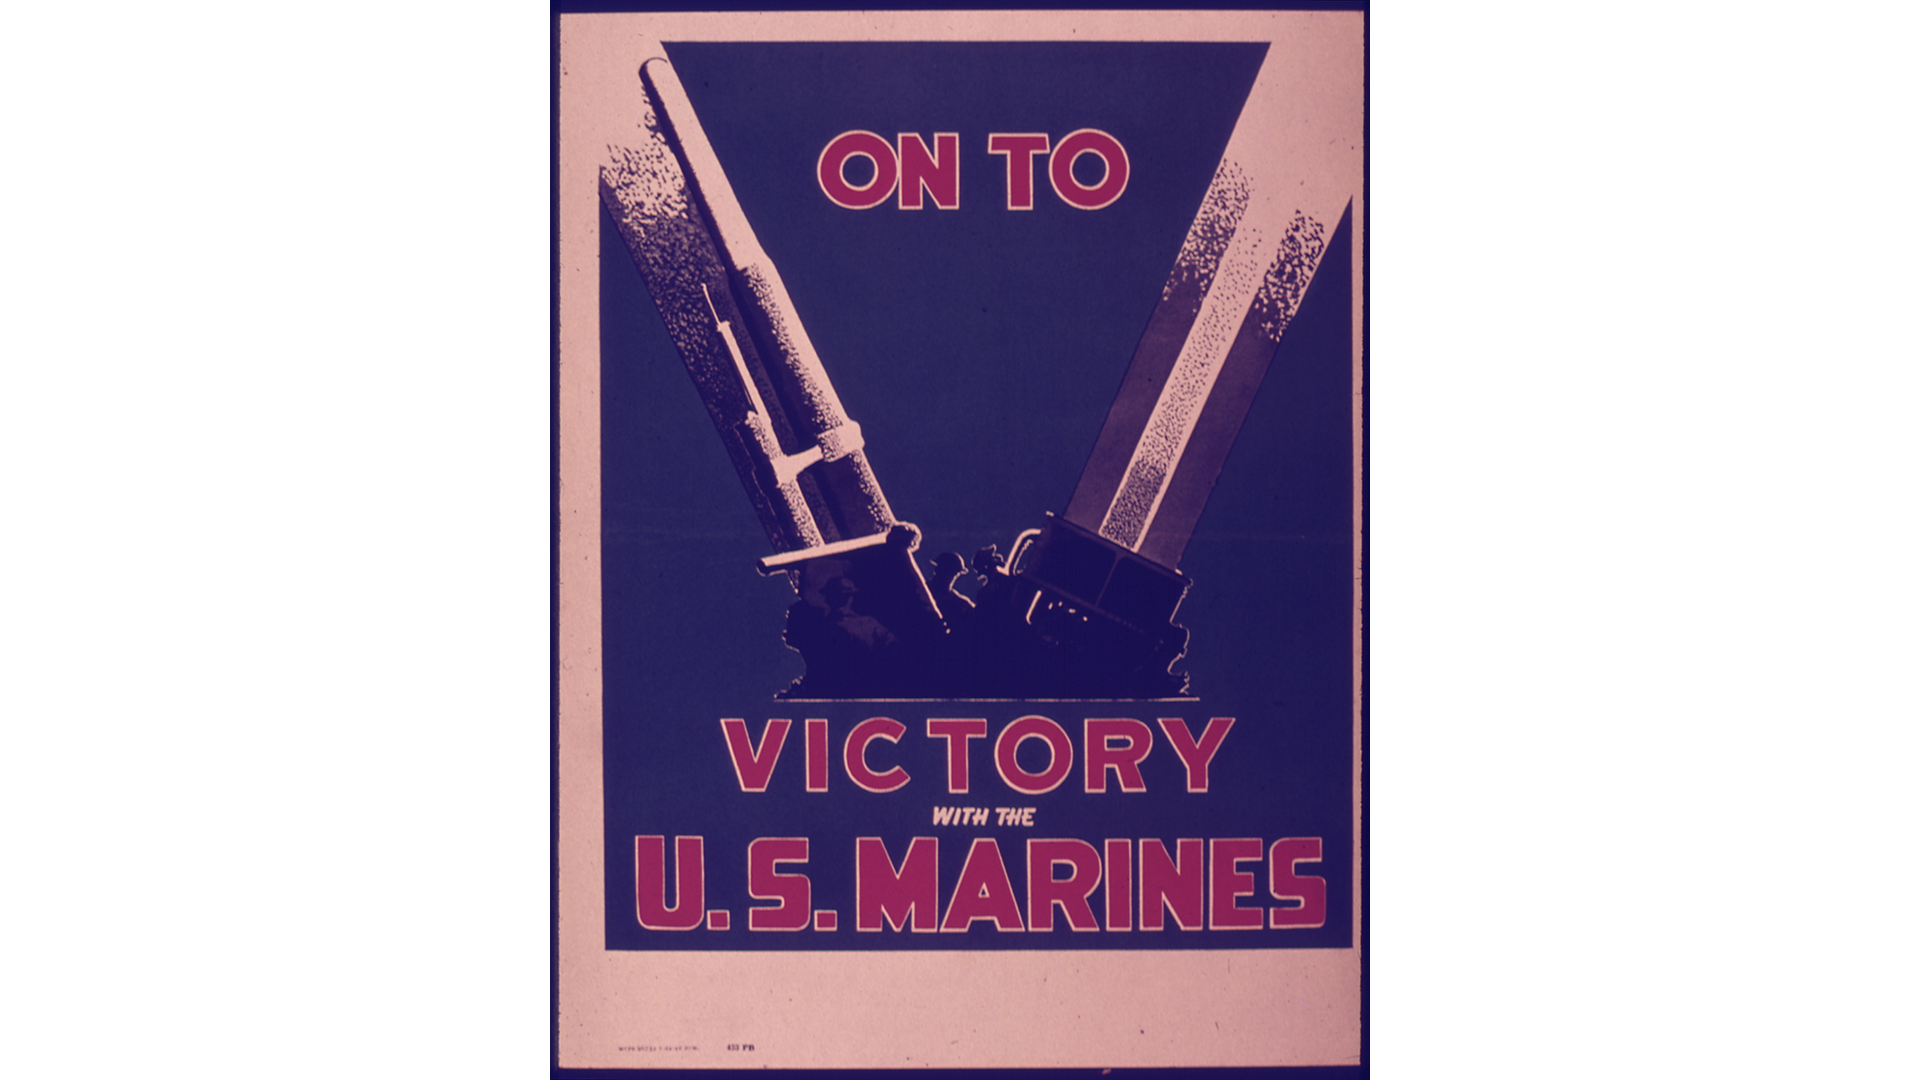 Recruitment poster for the Marines.